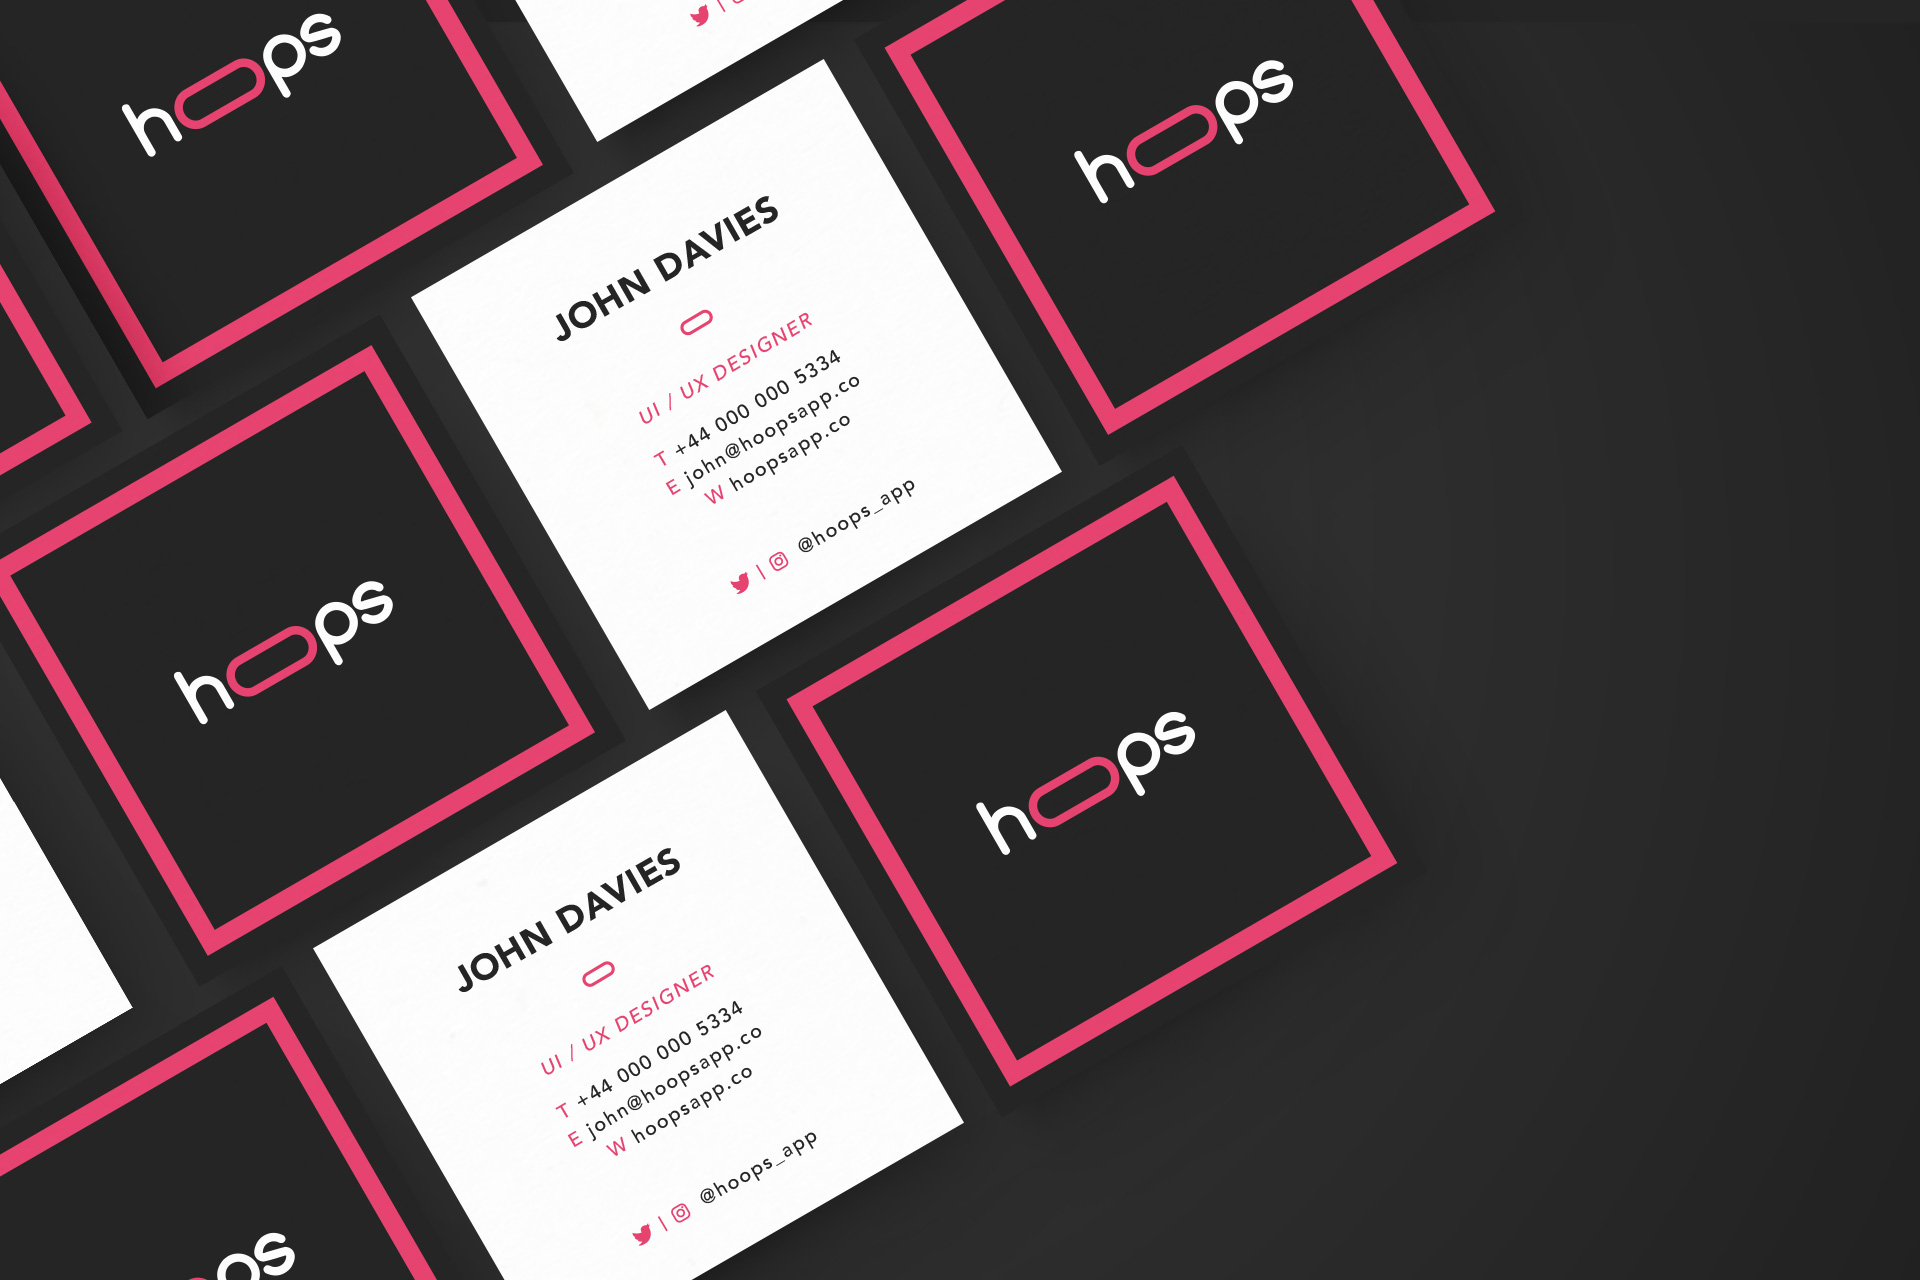 Hoops-Connect-business-cards-by-Orfi-Media